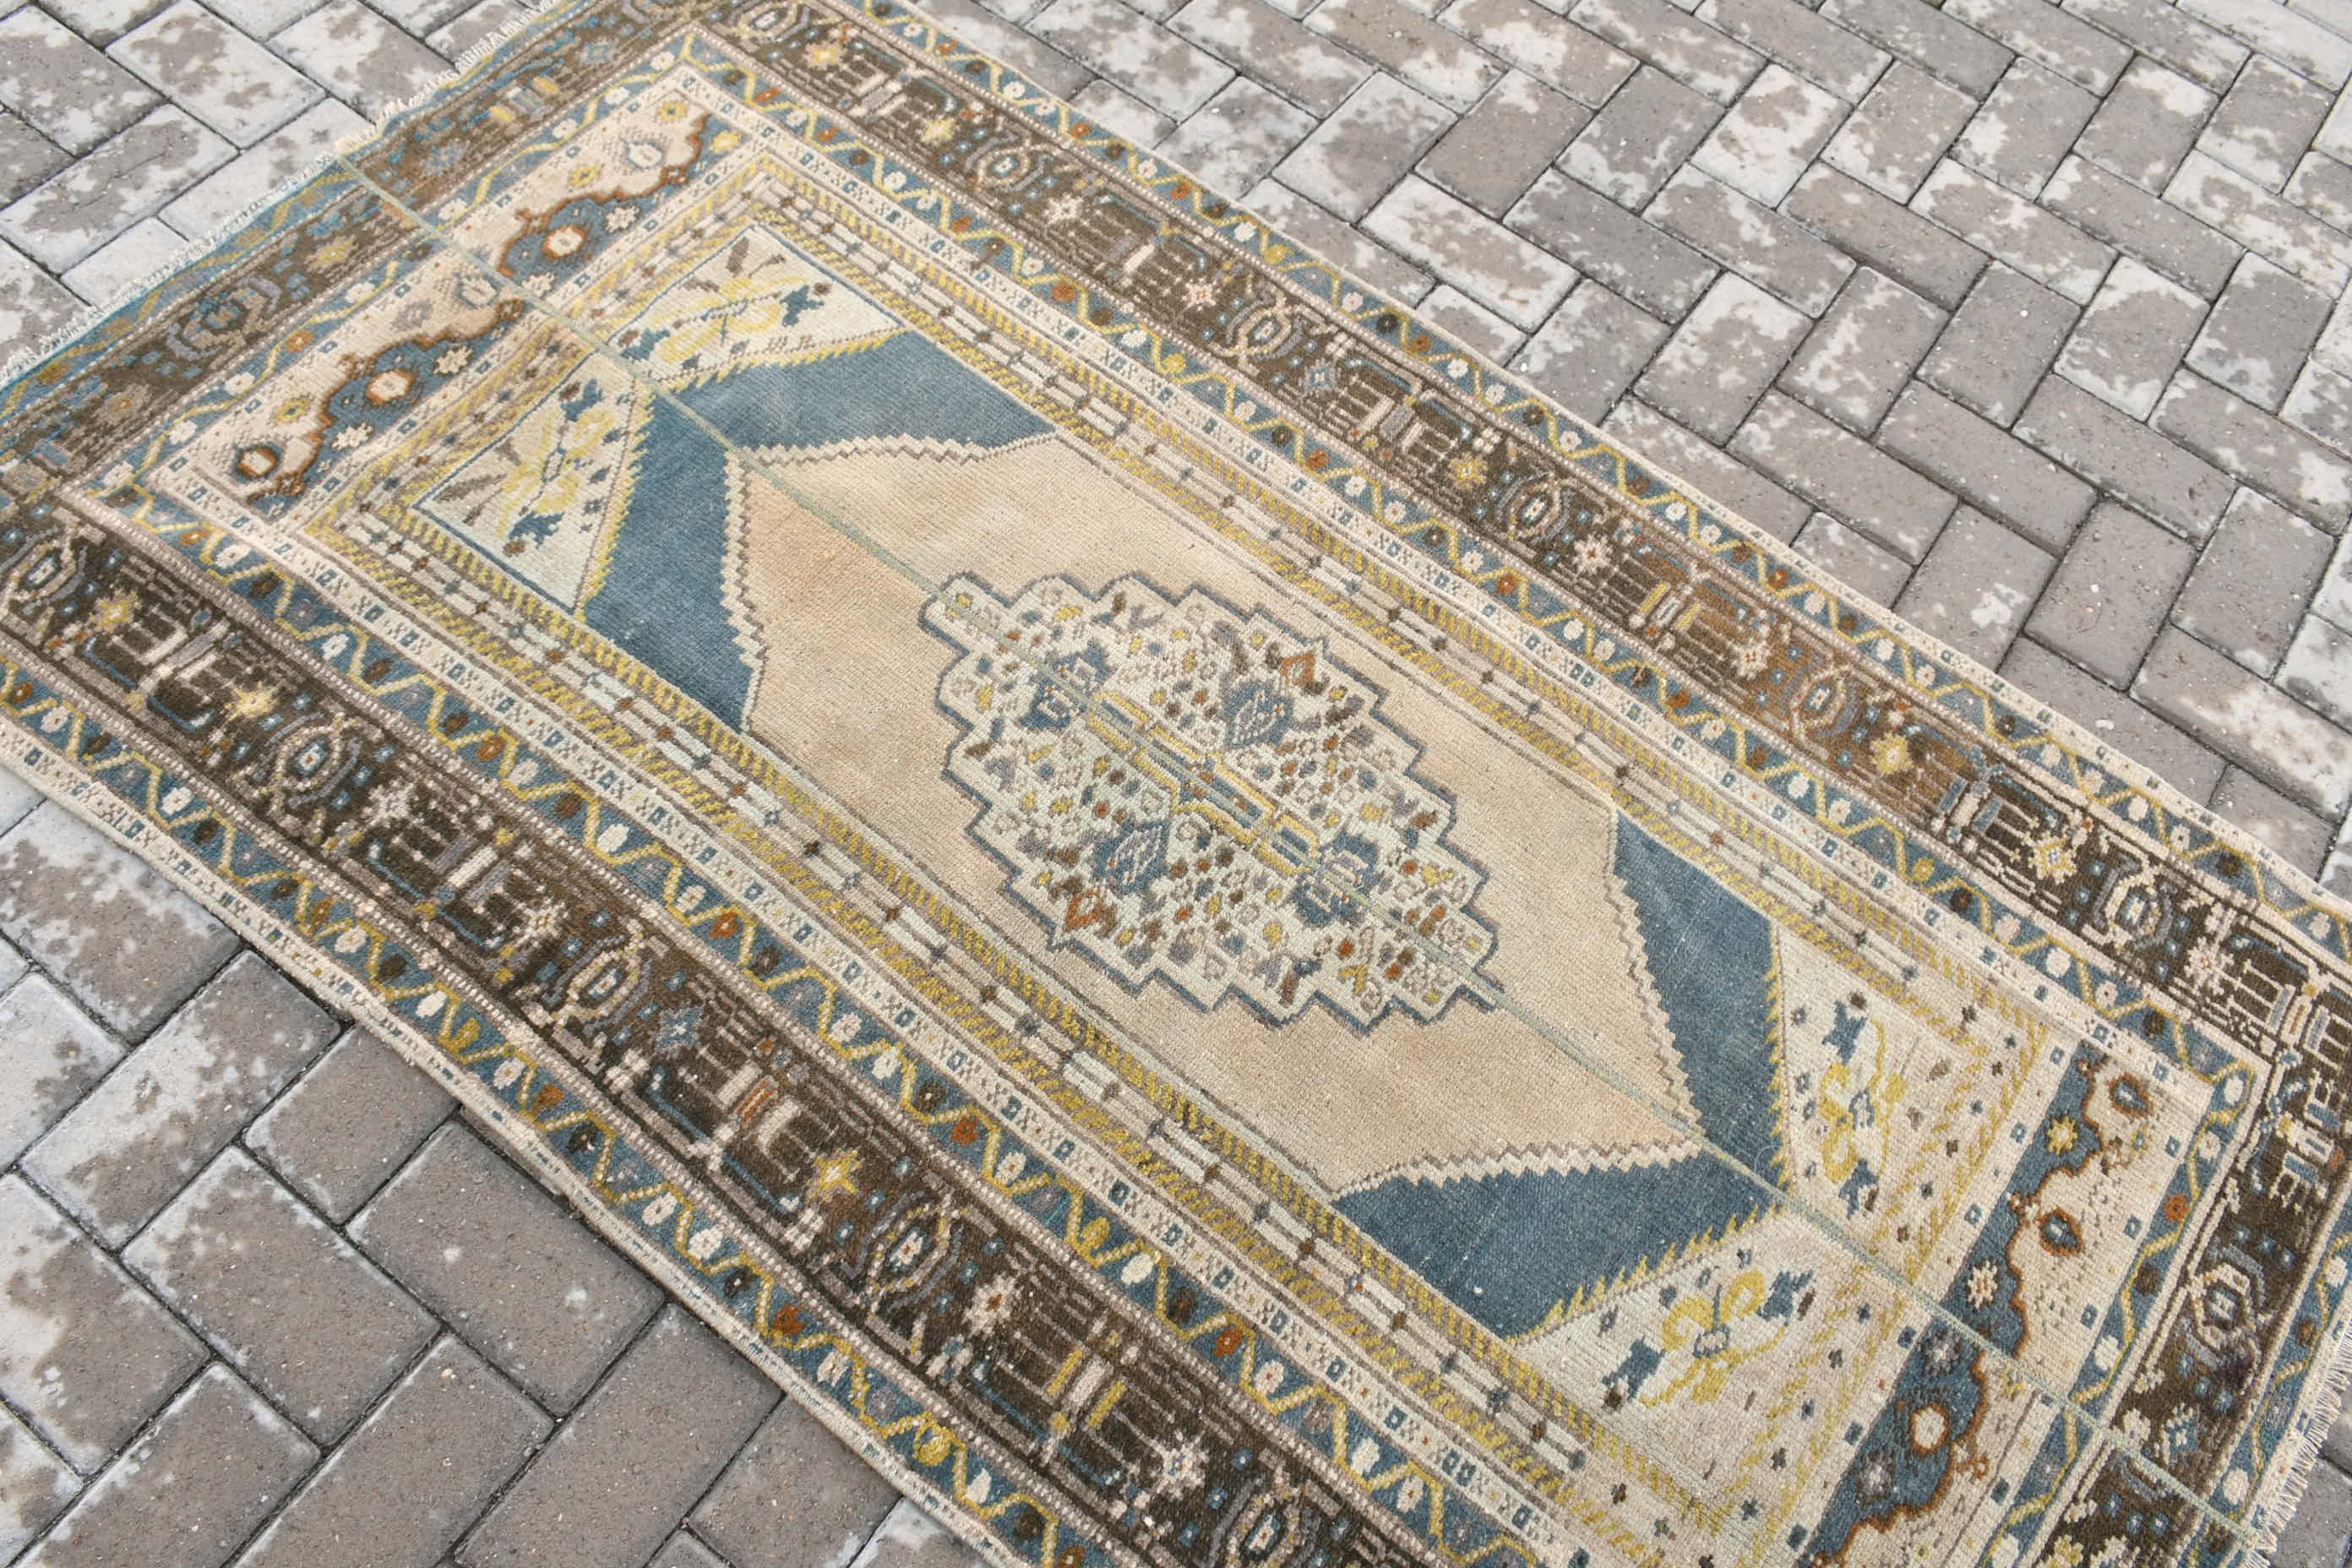 Vintage Rug, Rugs for Entry, Entry Rug, Turkish Rugs, Oriental Rugs, 3.5x6.2 ft Accent Rug, Brown Oushak Rug, Floor Rugs, Kitchen Rug